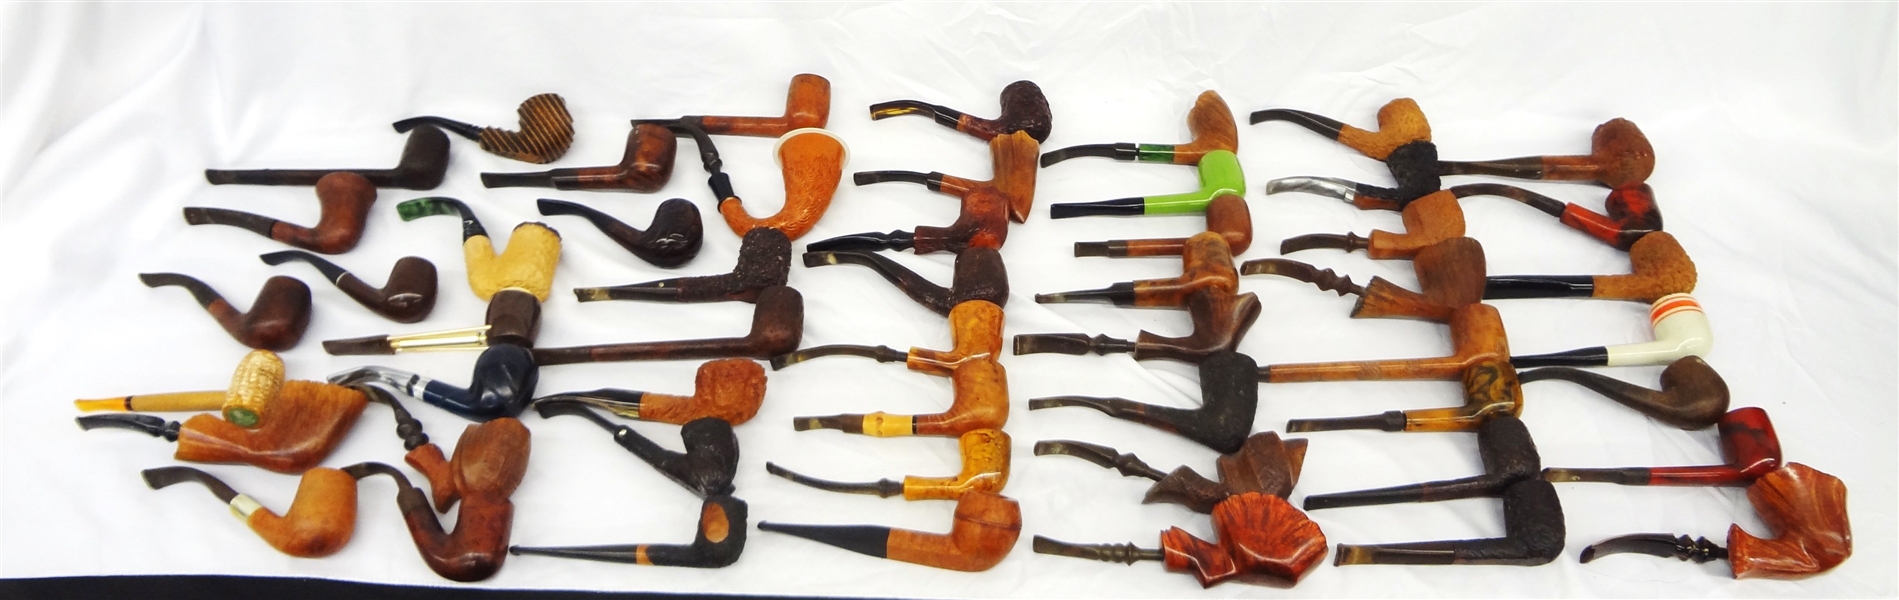 (53) Smoking Pipes: Dunhill, Harcourt, GBD, Stanwell, Tinder Box, Others